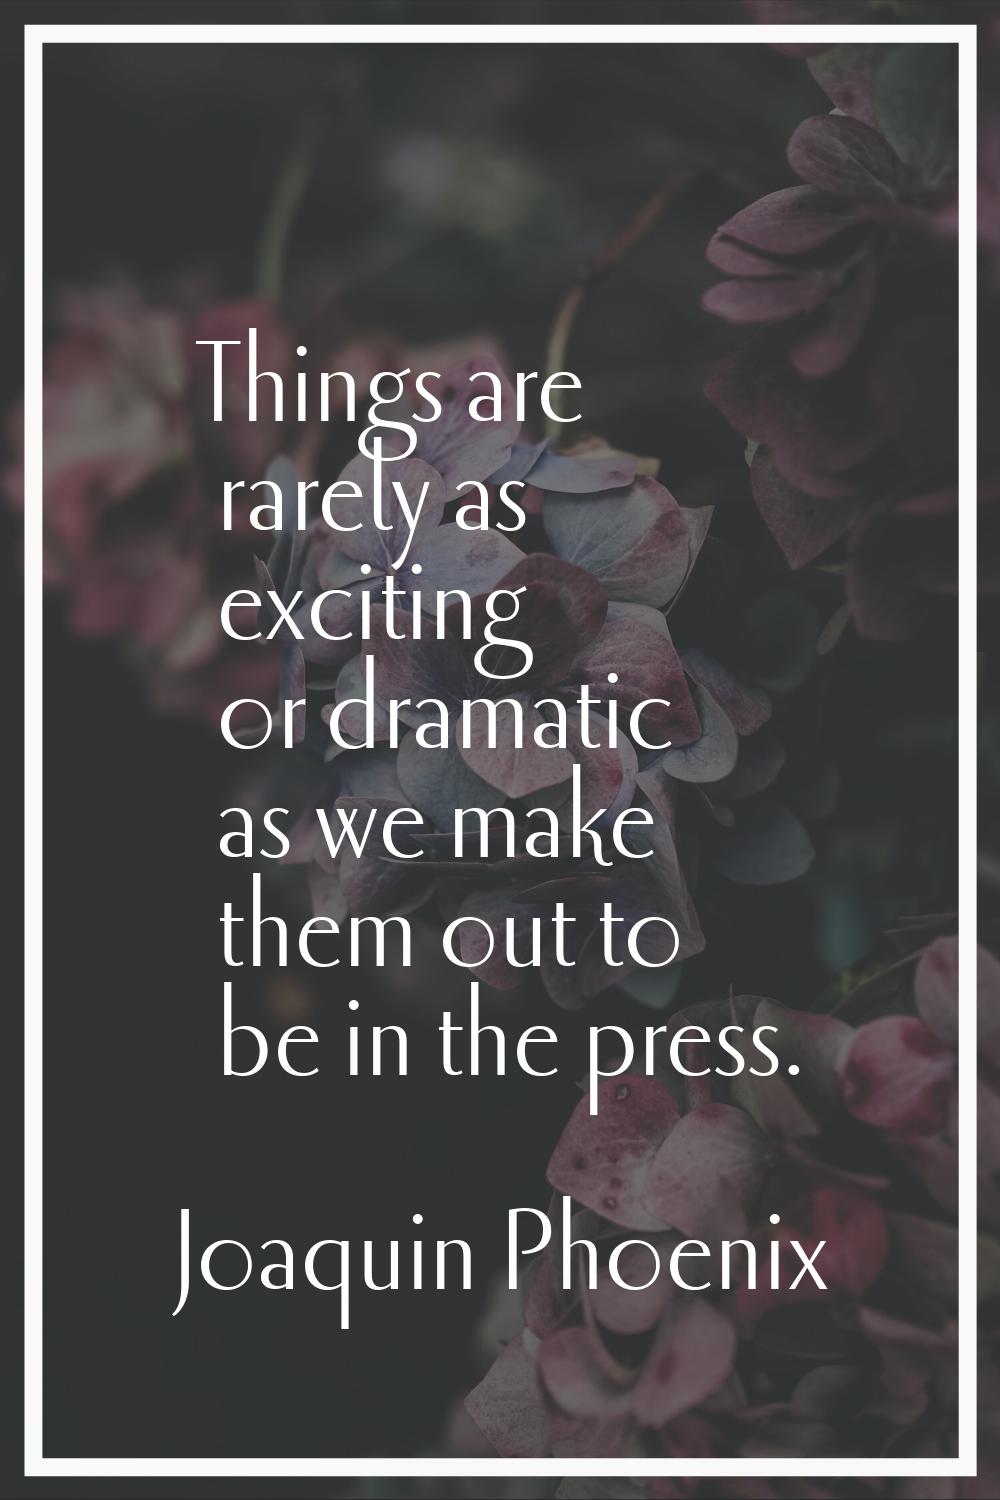 Things are rarely as exciting or dramatic as we make them out to be in the press.